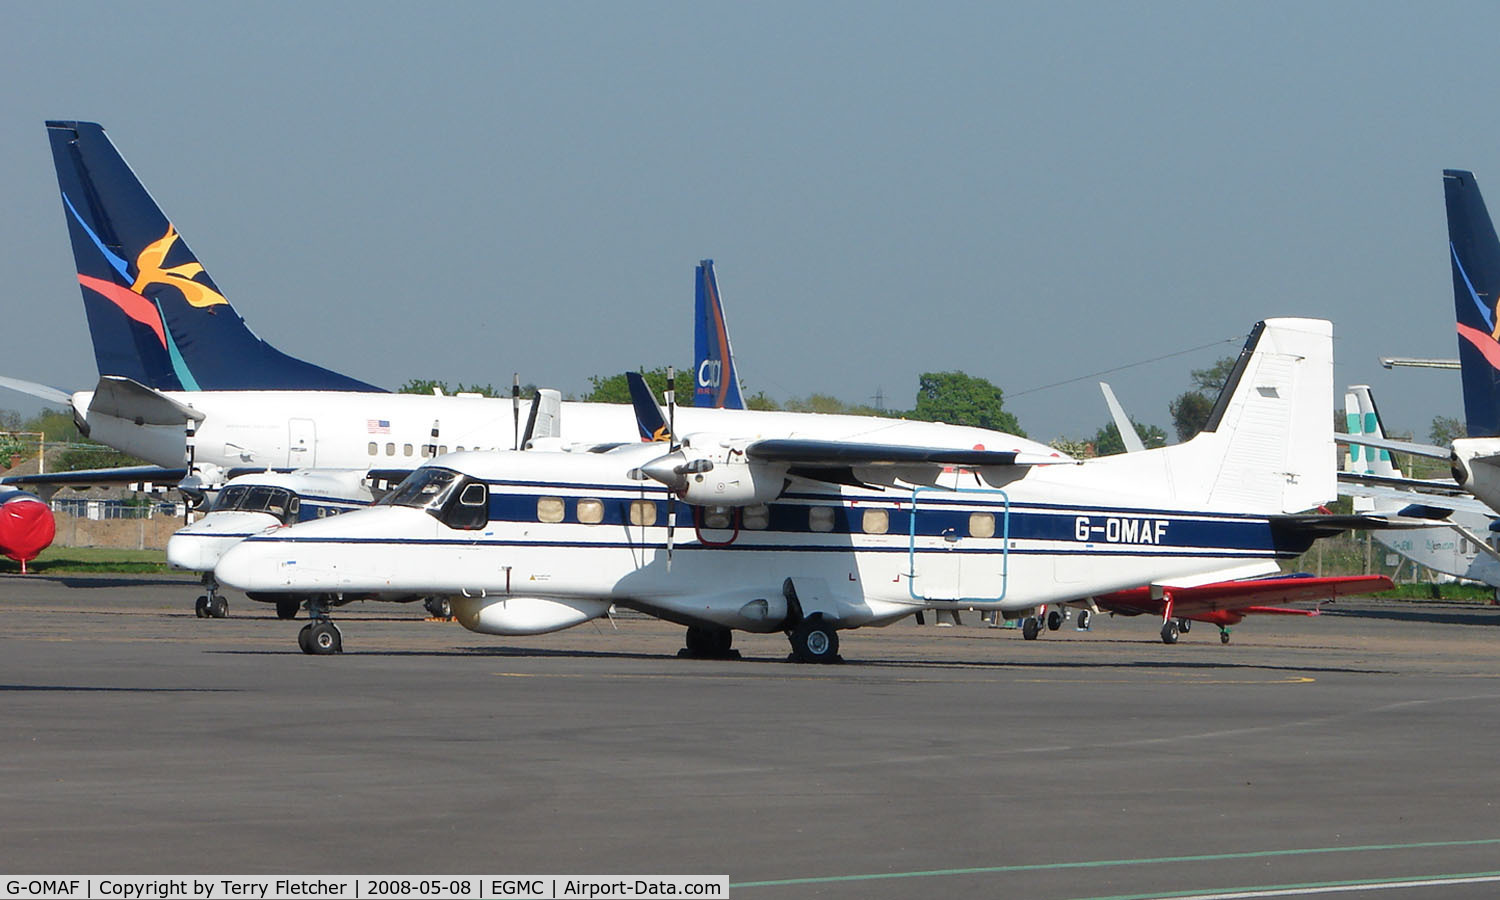 G-OMAF, 1986 Dornier 228-202K C/N 8112, One of two Ministry of Fisheries Do 228 at Southend today